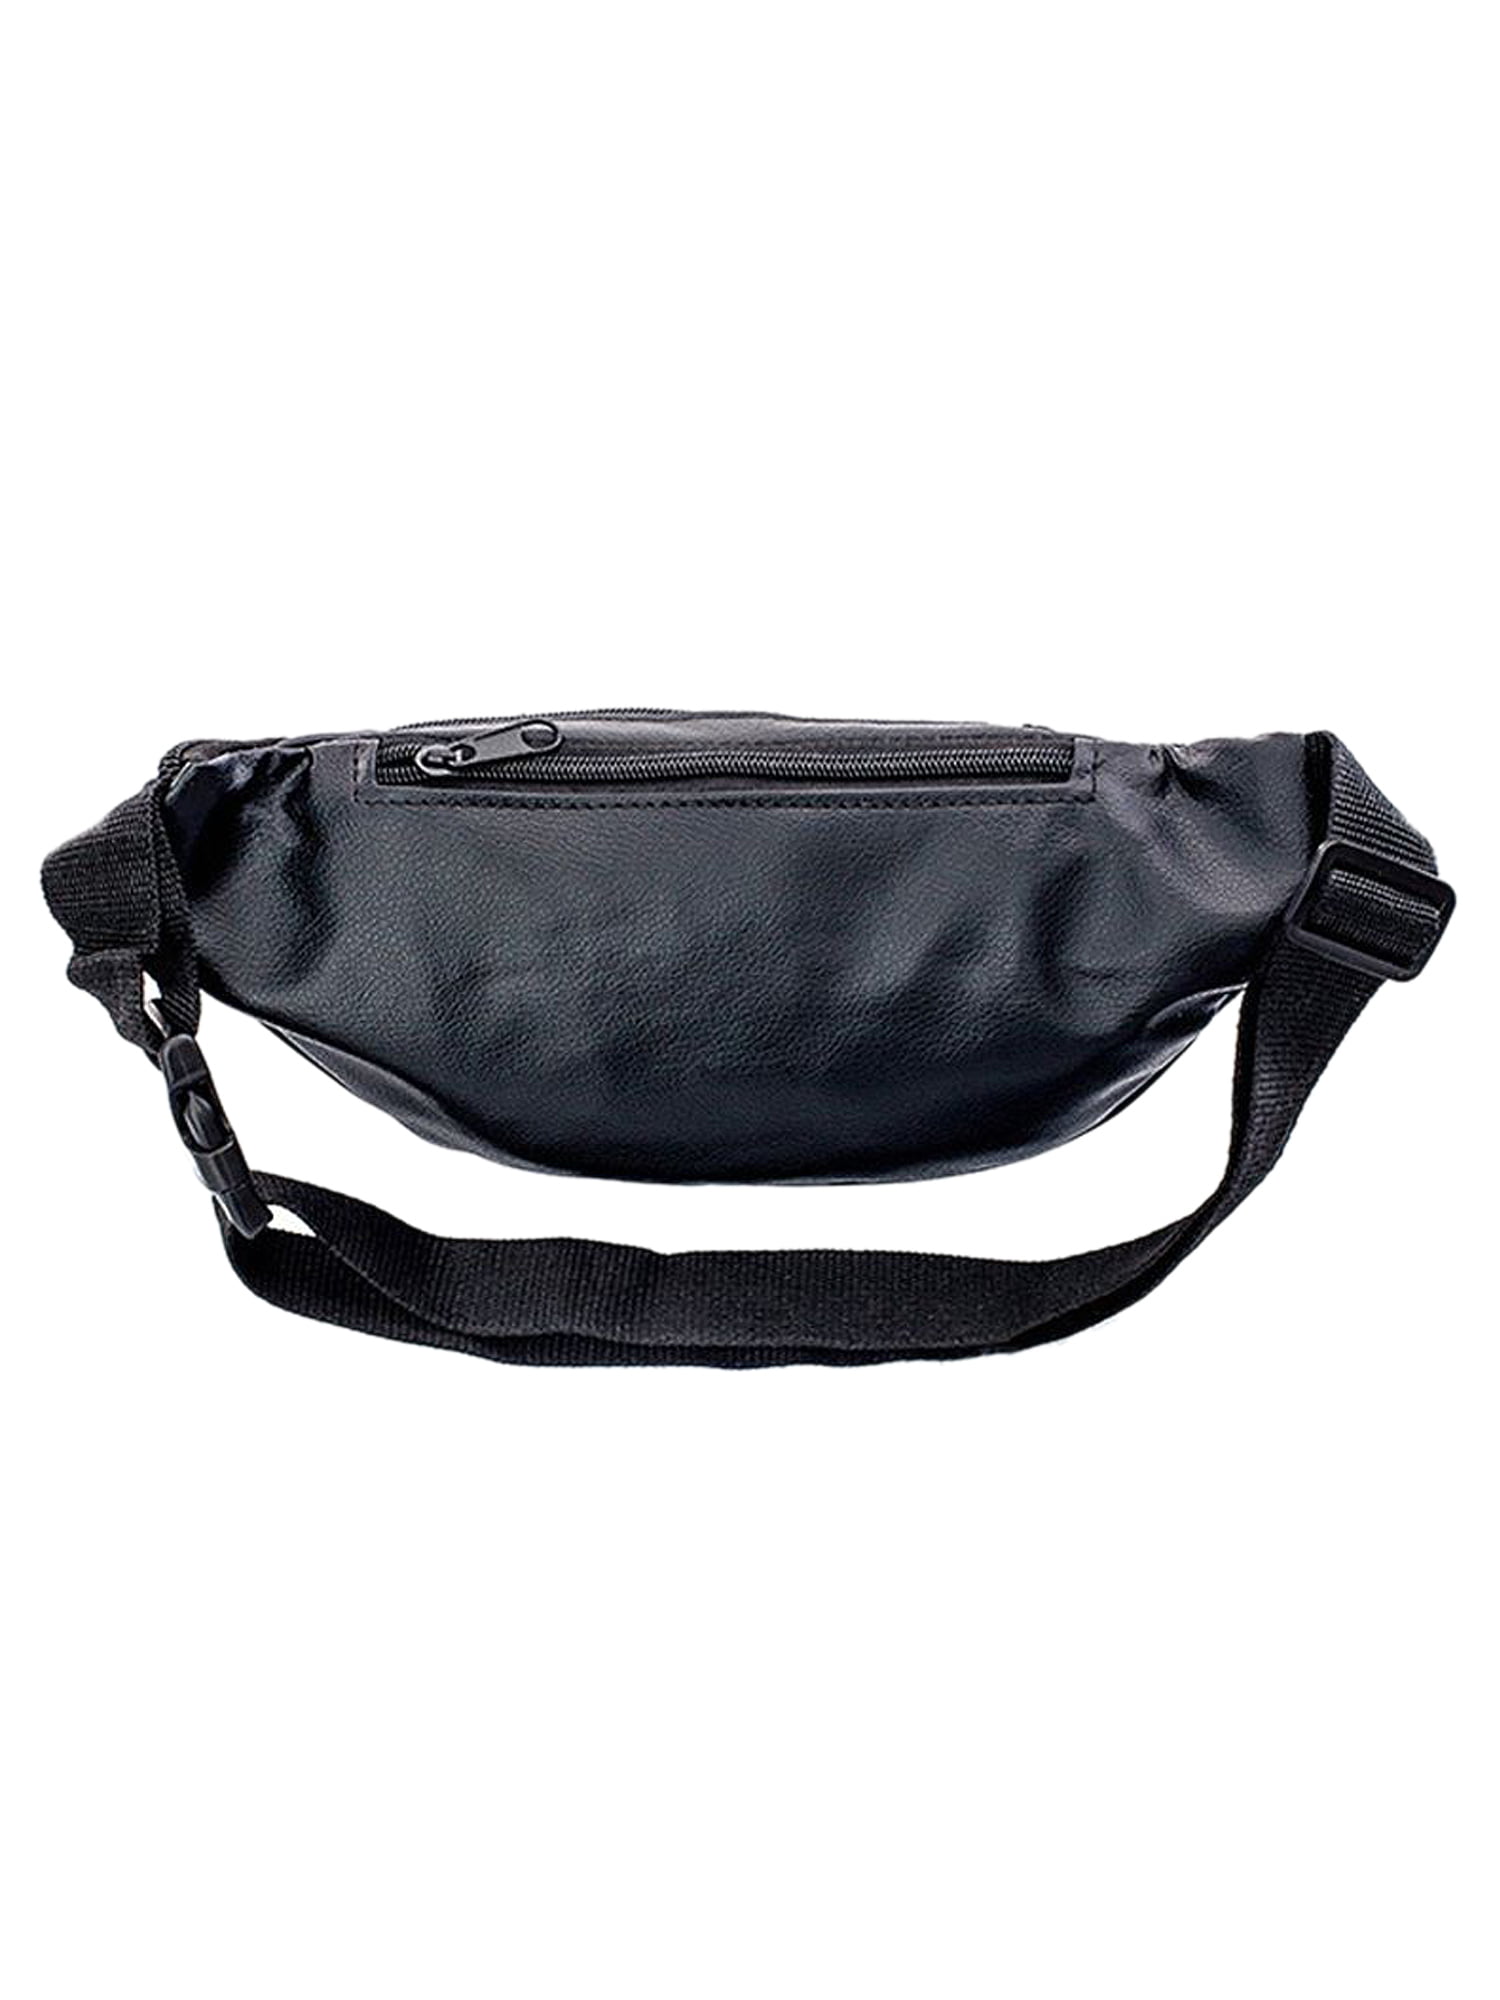 Louisville Cardinals Large Fanny Pack - Sports Unlimited